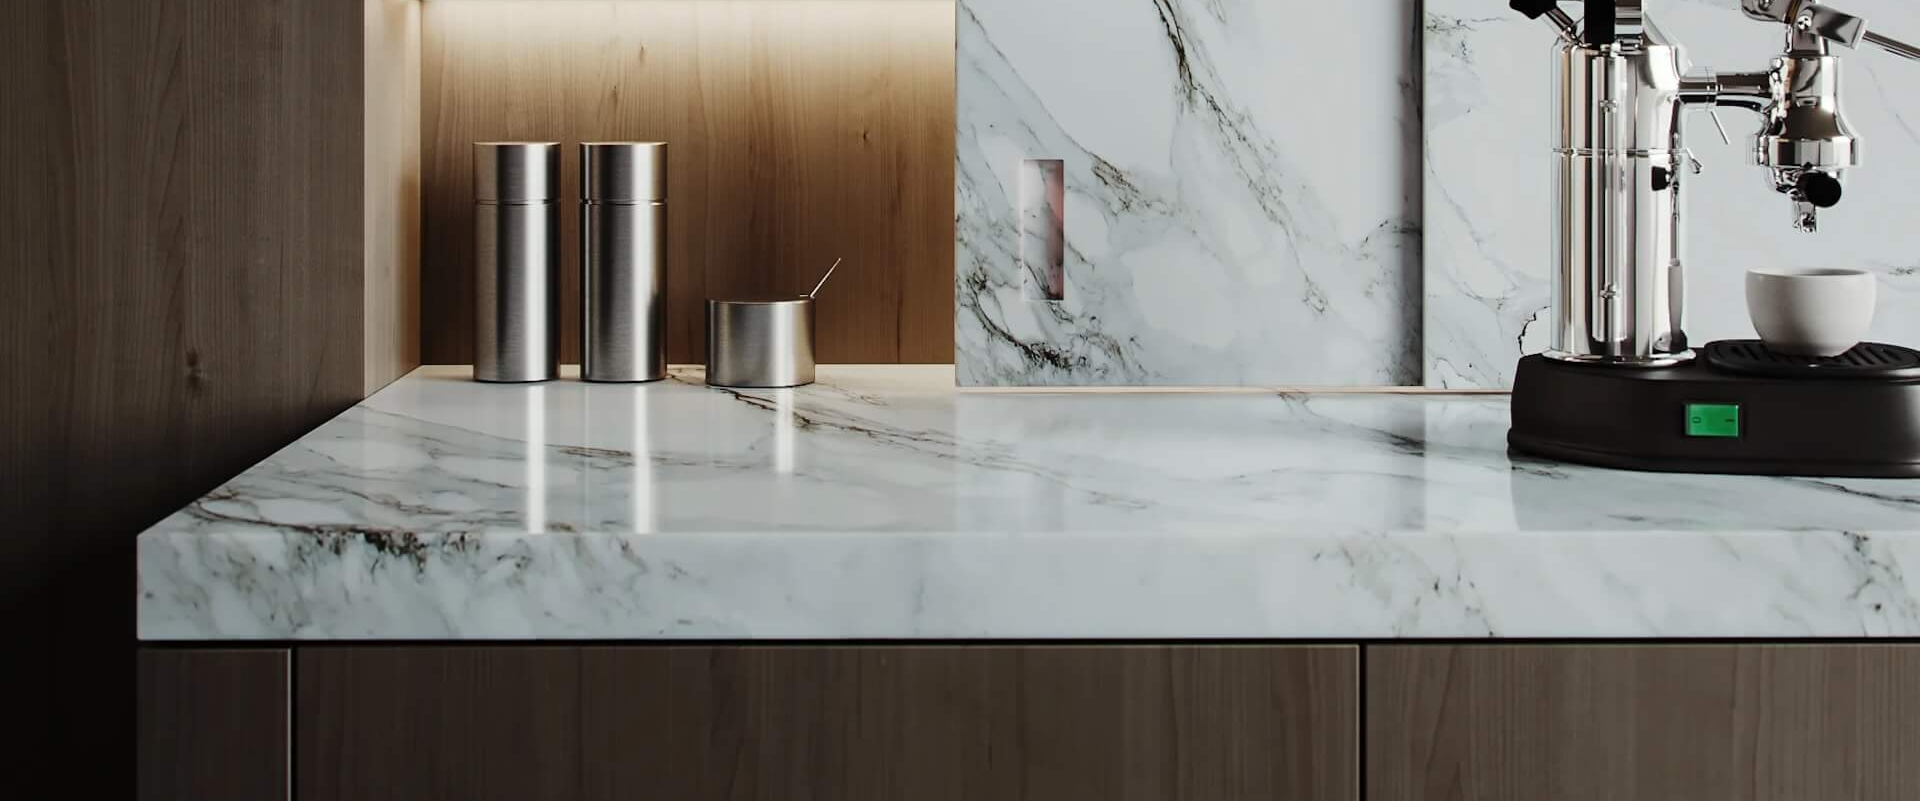 Marble Kitchen Counter 3D Visualization